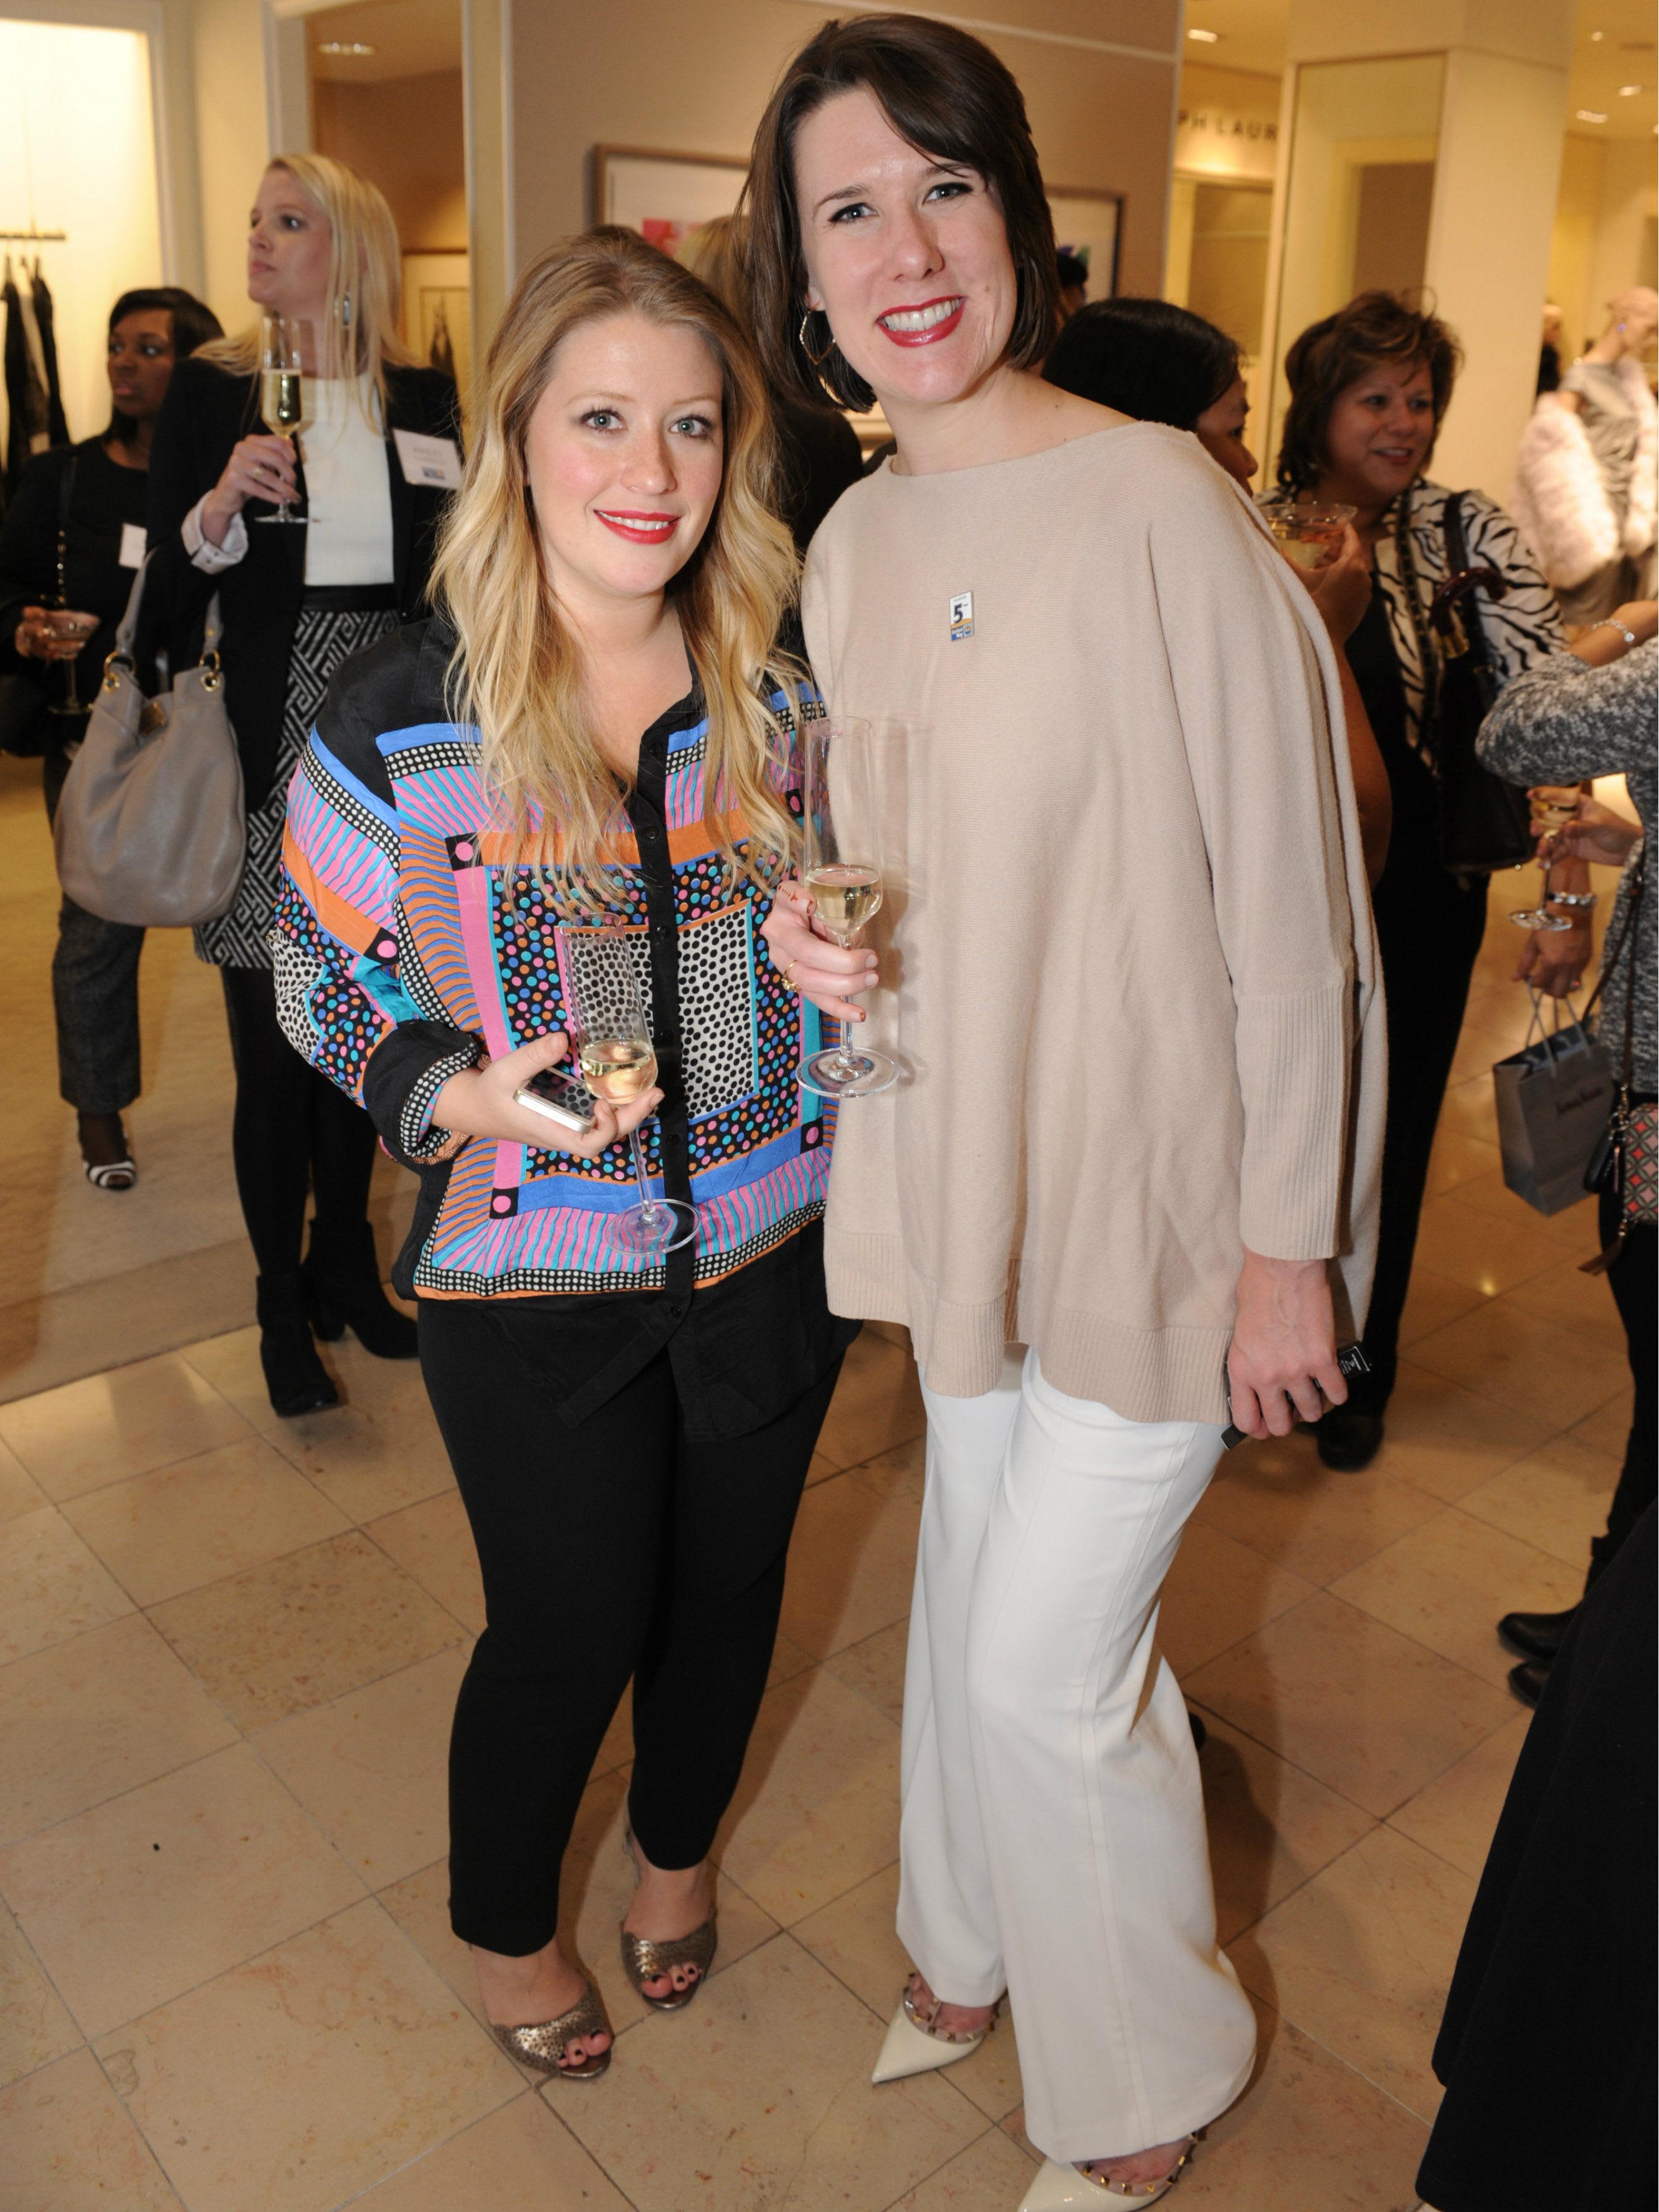 Dallas do-gooders fall into fashion with United Way at refined